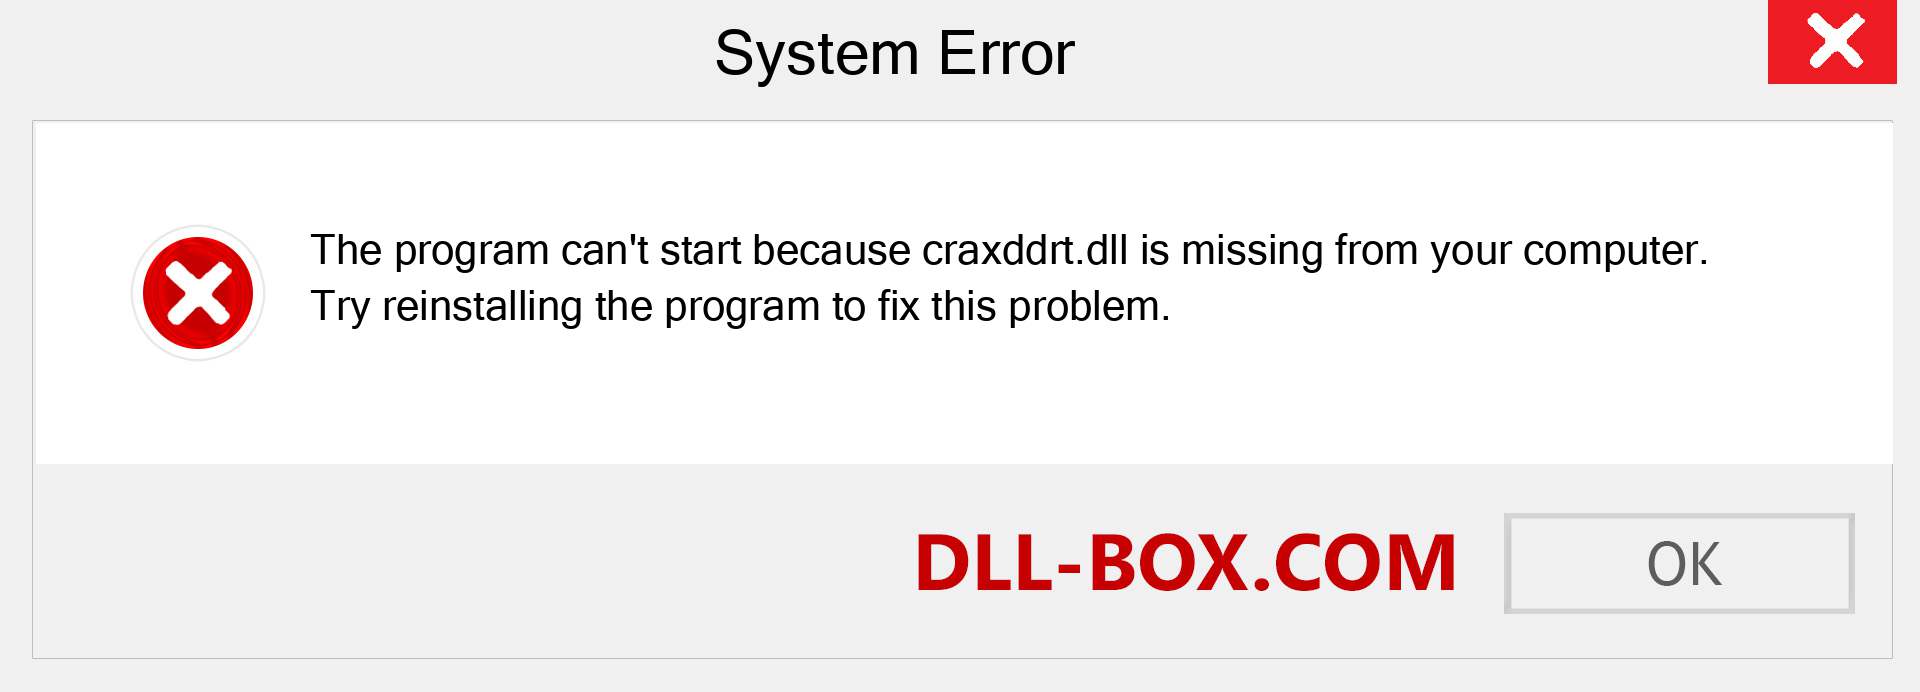  craxddrt.dll file is missing?. Download for Windows 7, 8, 10 - Fix  craxddrt dll Missing Error on Windows, photos, images